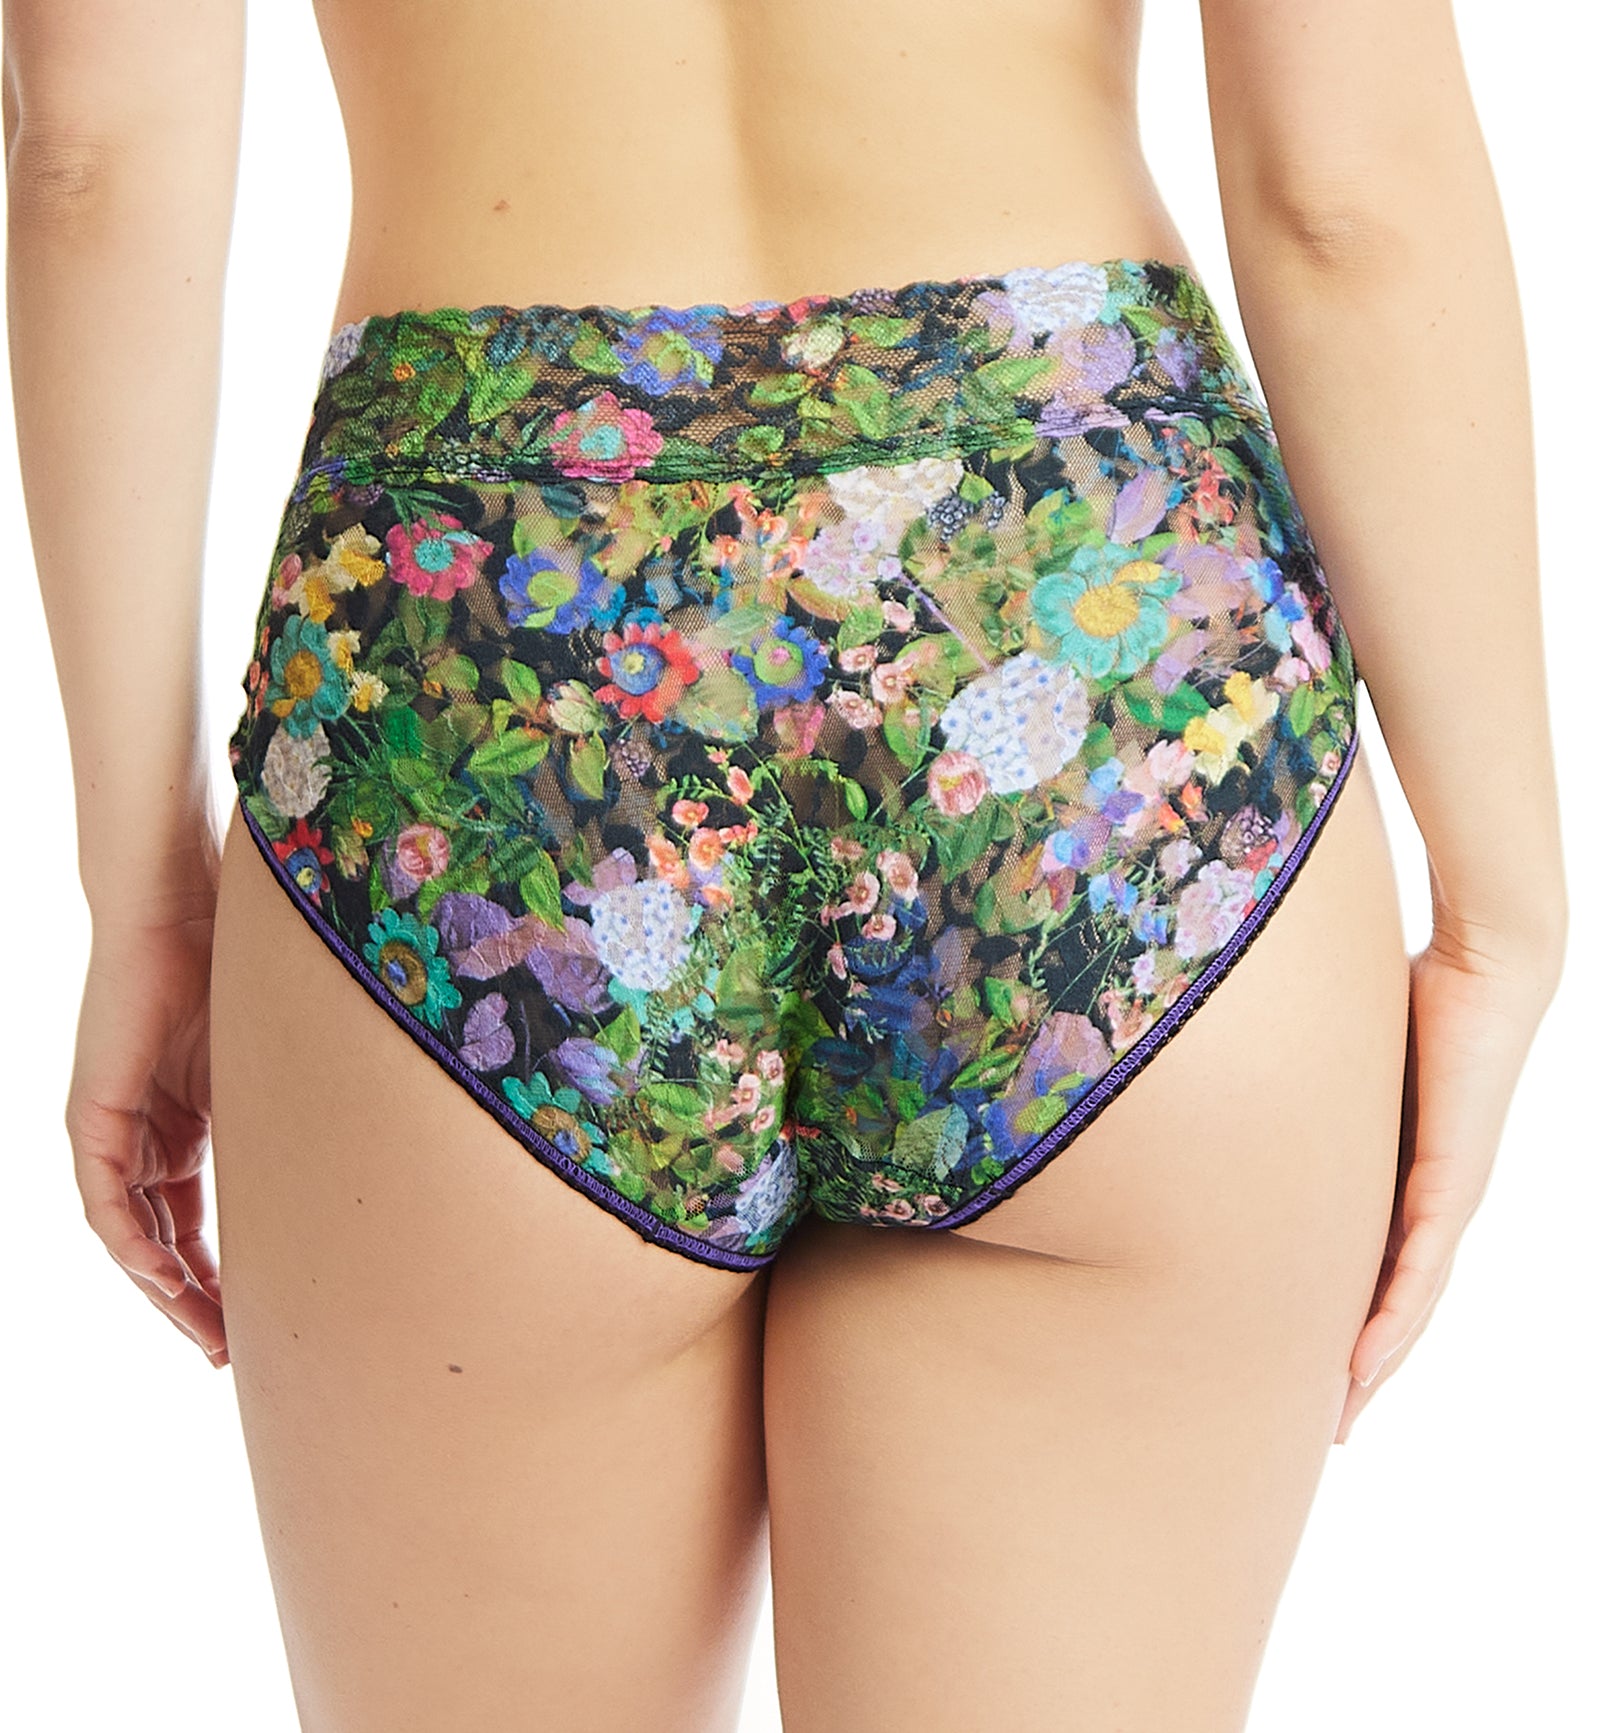 Hanky Panky Signature Lace Printed French Brief (PR461),Small,Voices on the Veranda - Voices on the Veranda,Small